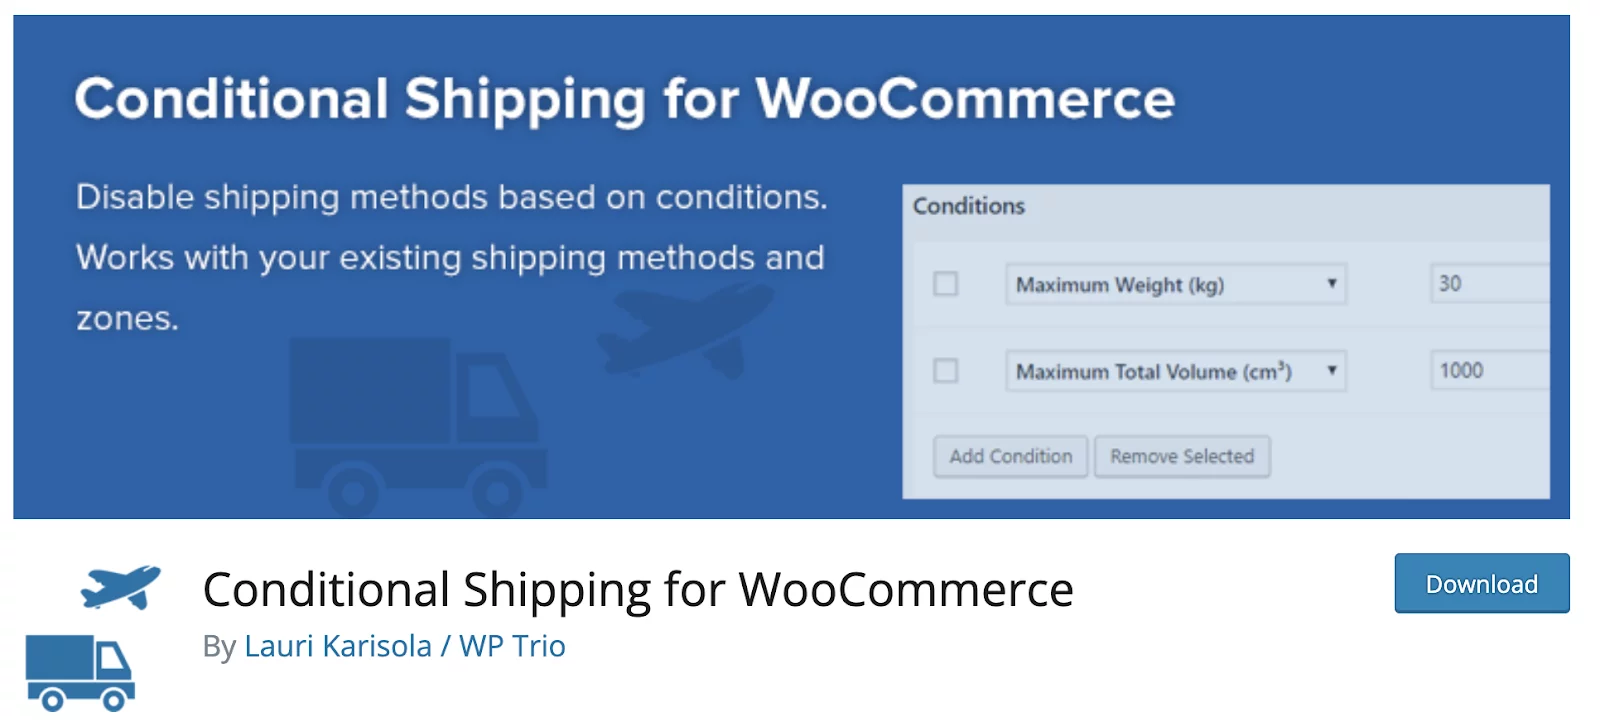 uto-select free shipping if available in WooCommerce